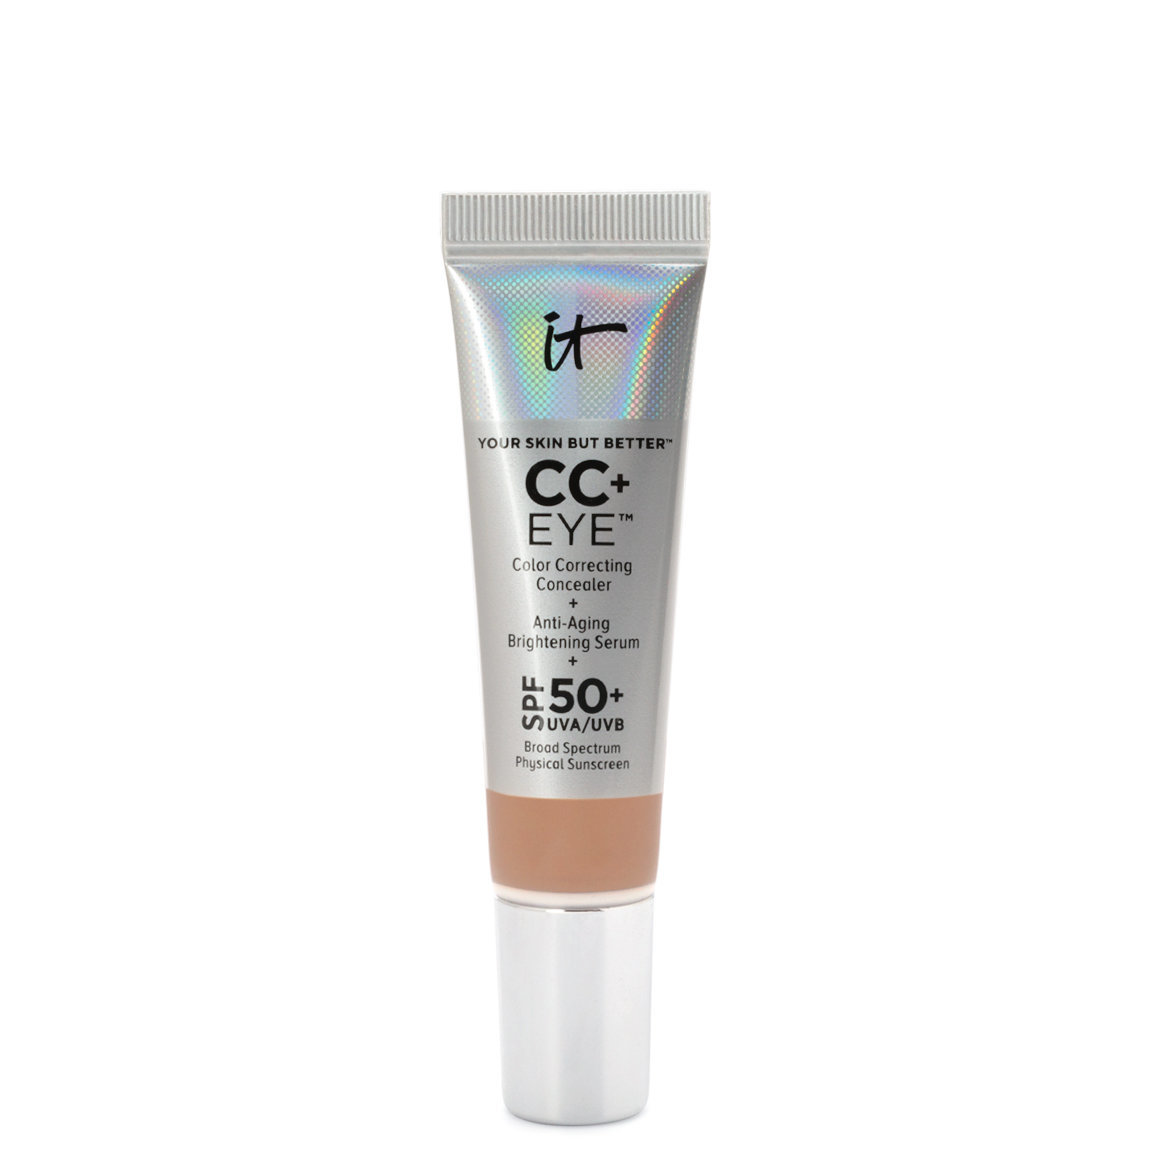 IT Cosmetics  CC+ Eye Physical SPF 50 Color Correcting Concealer Rich alternative view 1.